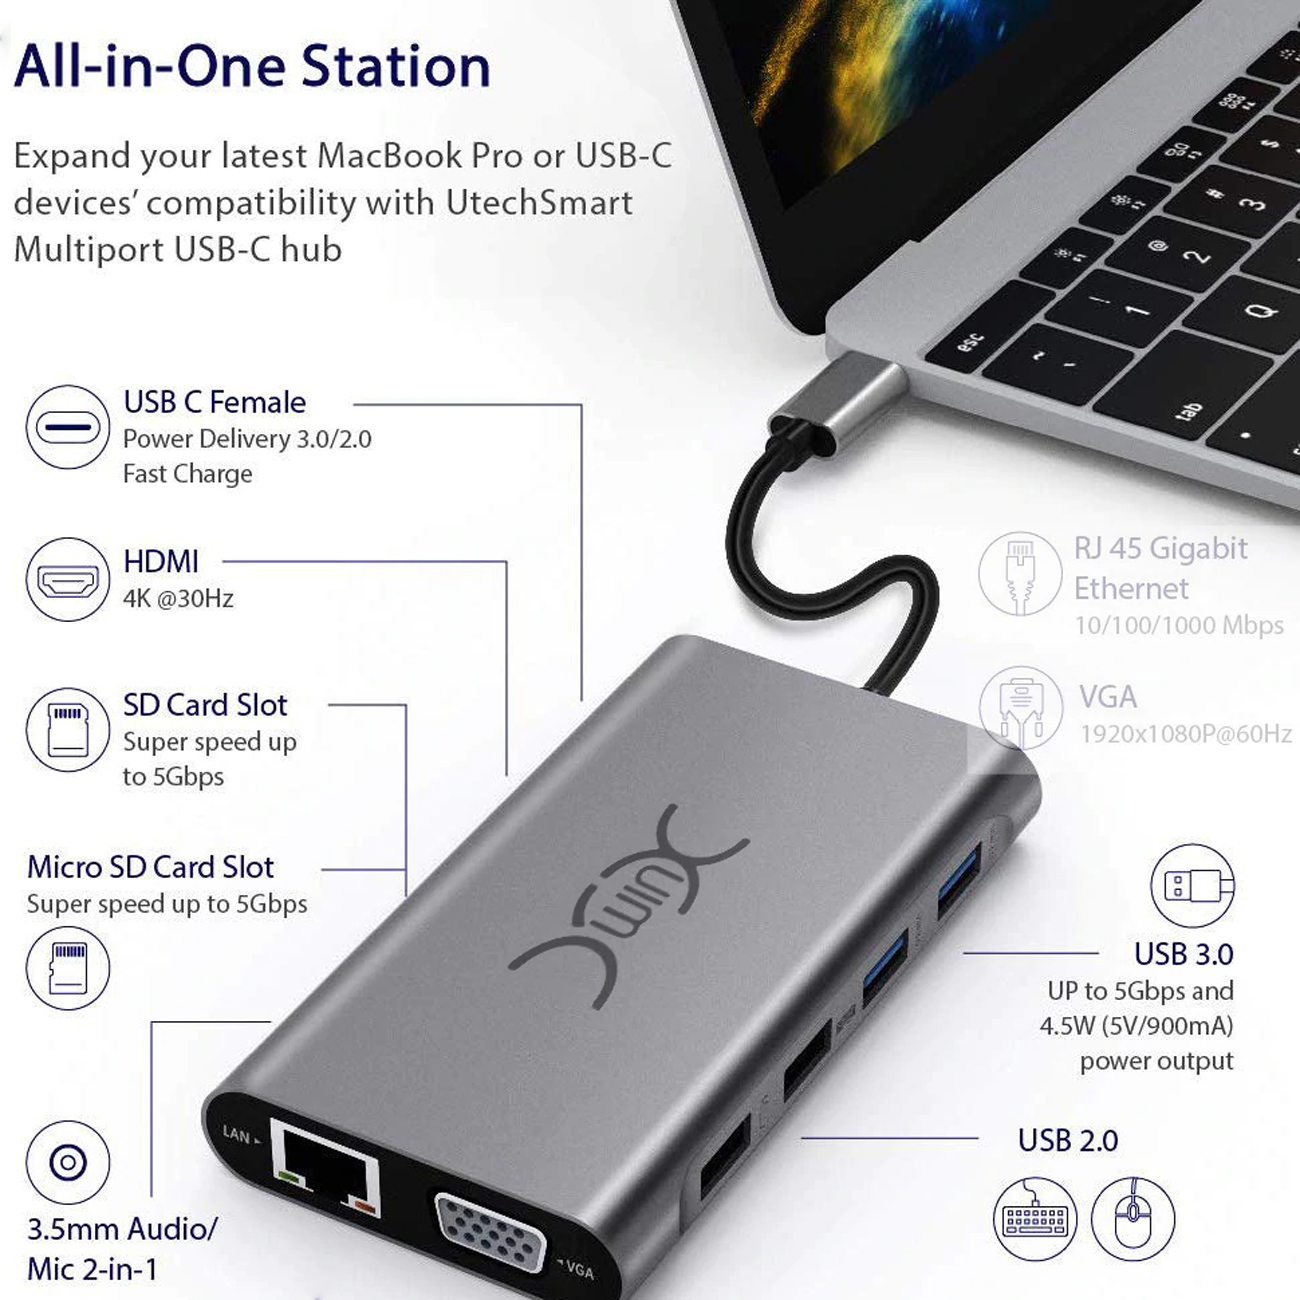 USB3.0/2.0 DP 15 in 1 Triple Display USB C Adapter with 4K HDMI USB C Hub VGA Audio USB C Docking Station Gigabit Ethernet SD/TF Card Slots Compatible for Apple Mac and Type C Devices USB-C 